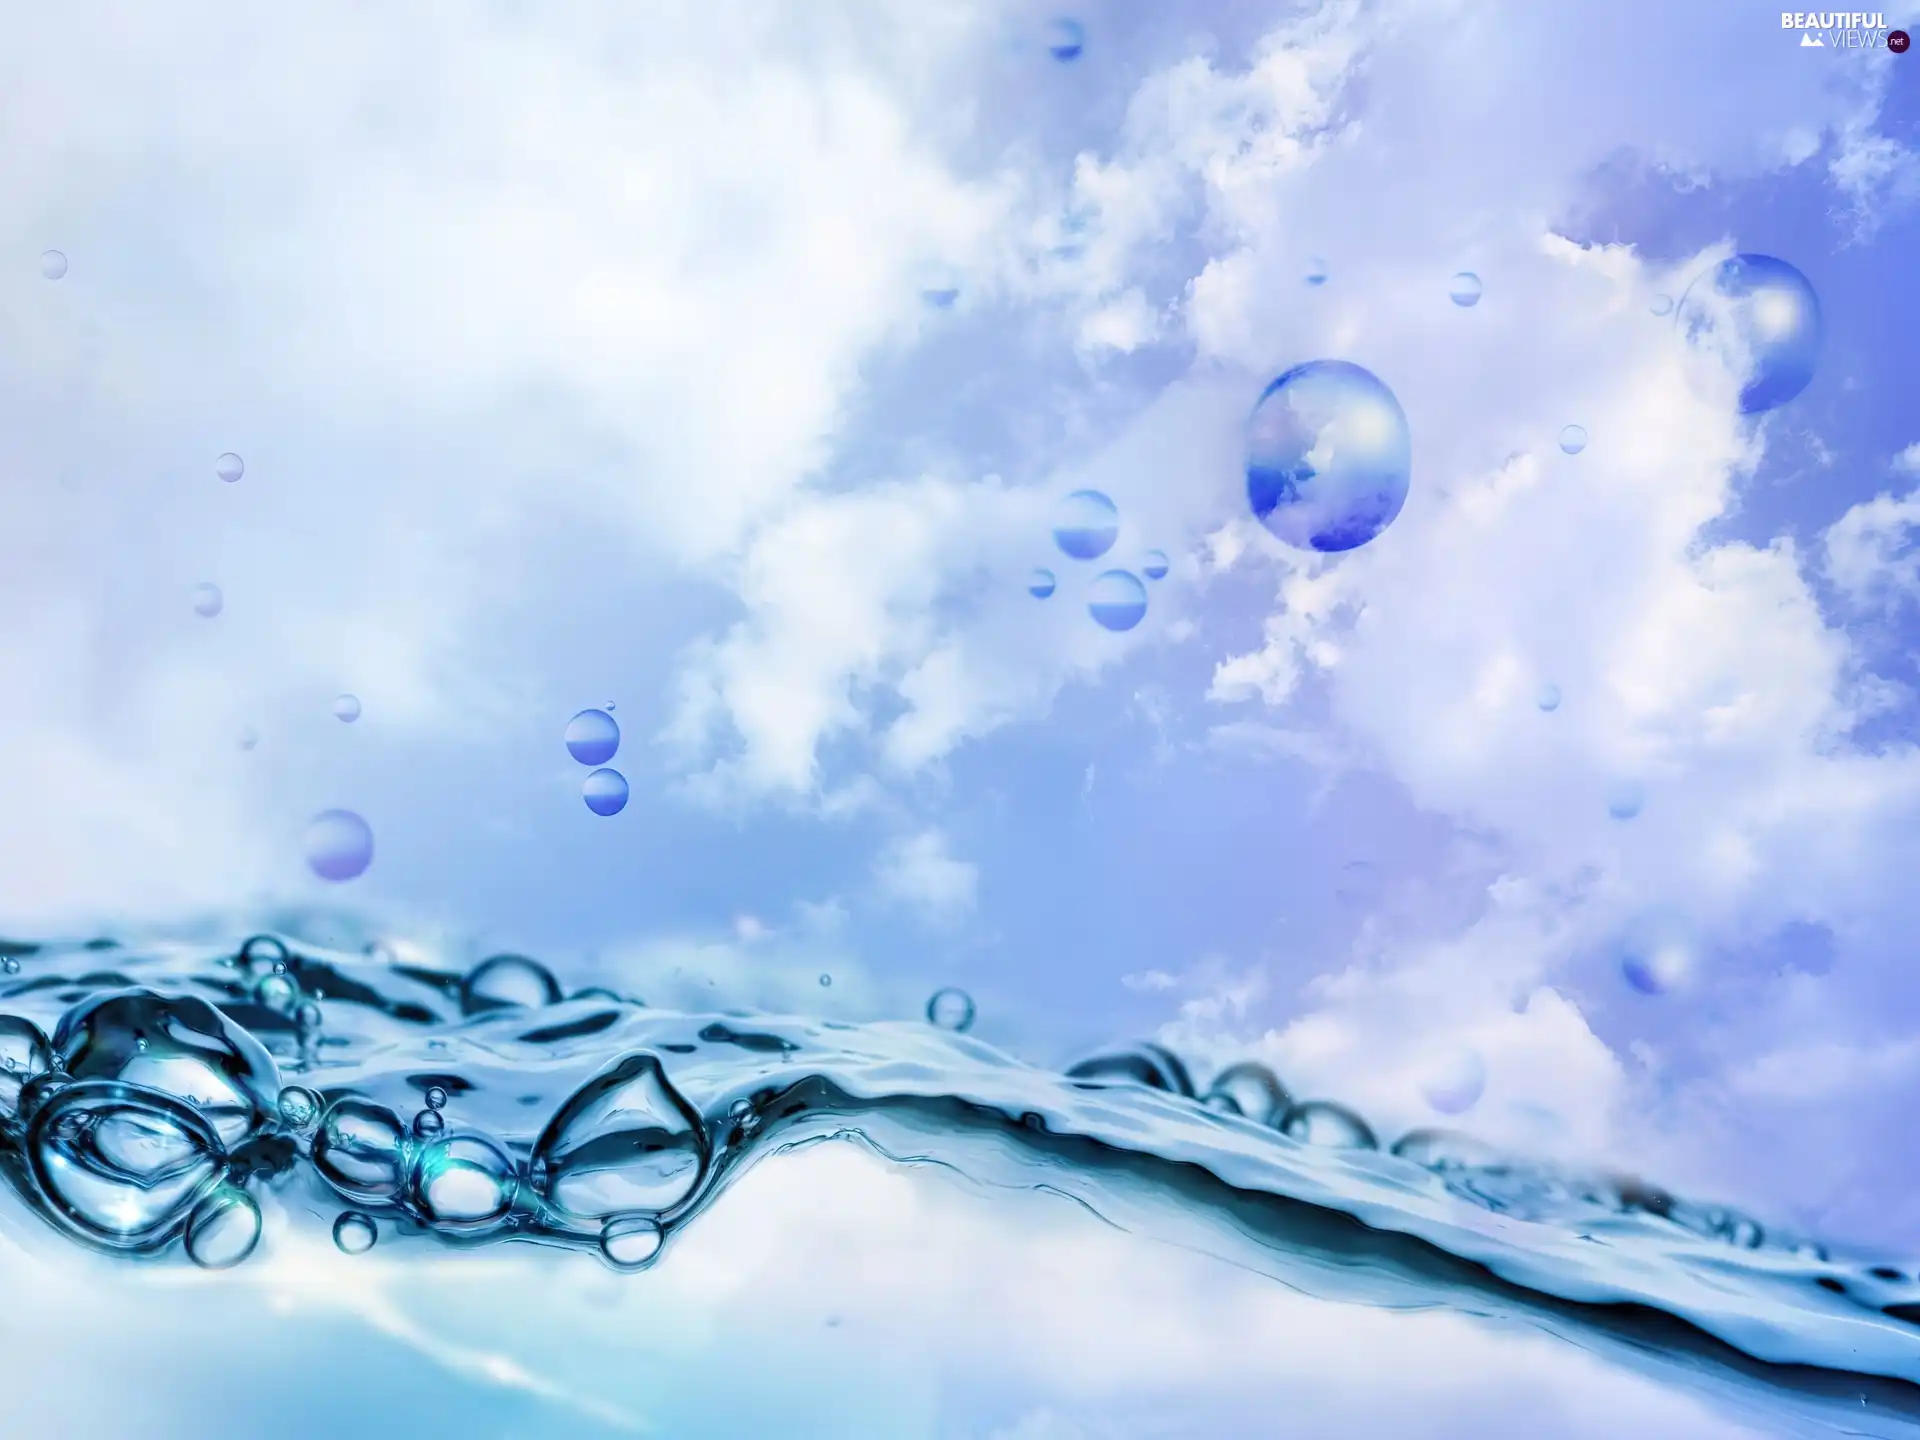 clouds, water, bubbles